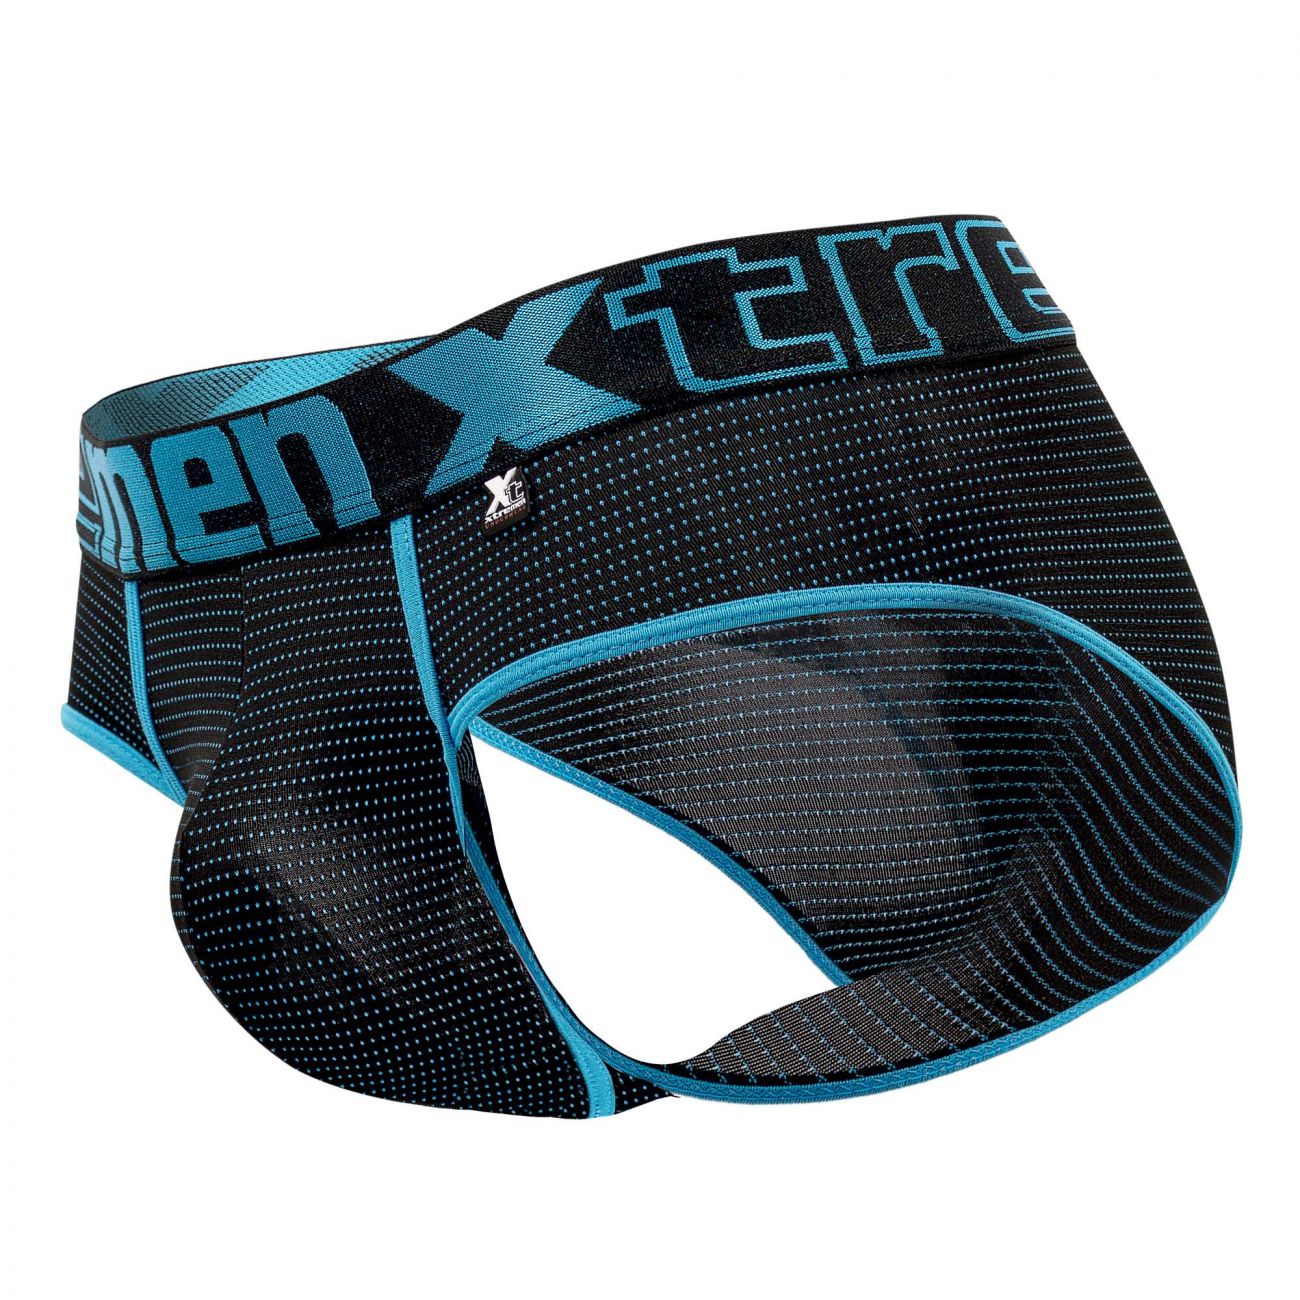 Xtremen 91062 Athletic Piping Briefs Black